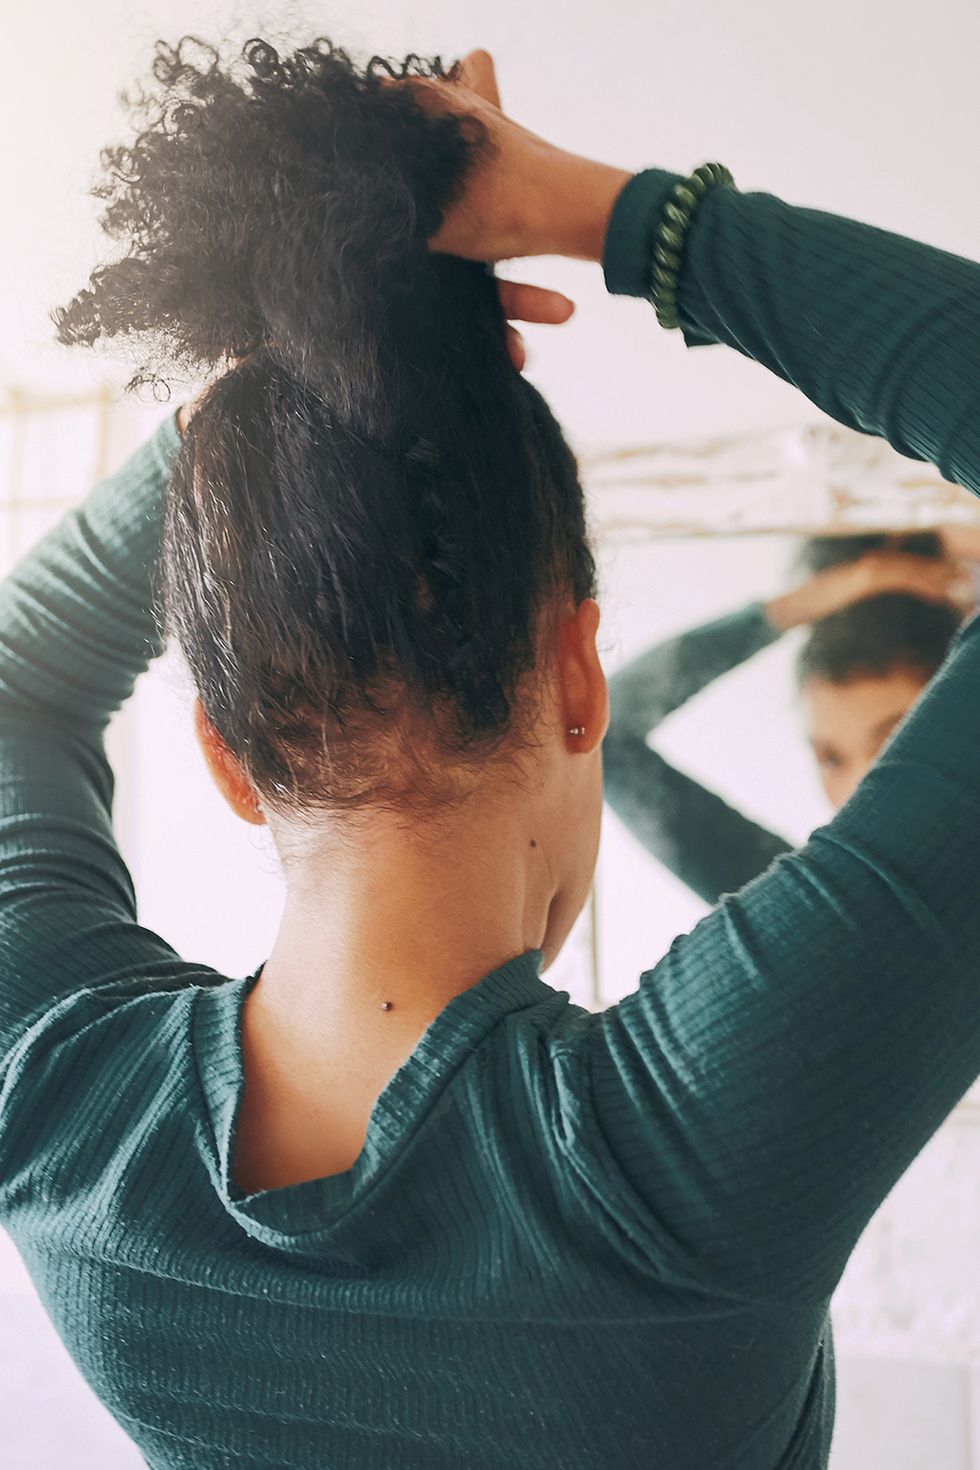 Receding Hairlines: How to Treat Thinning Hair for Women in 2022